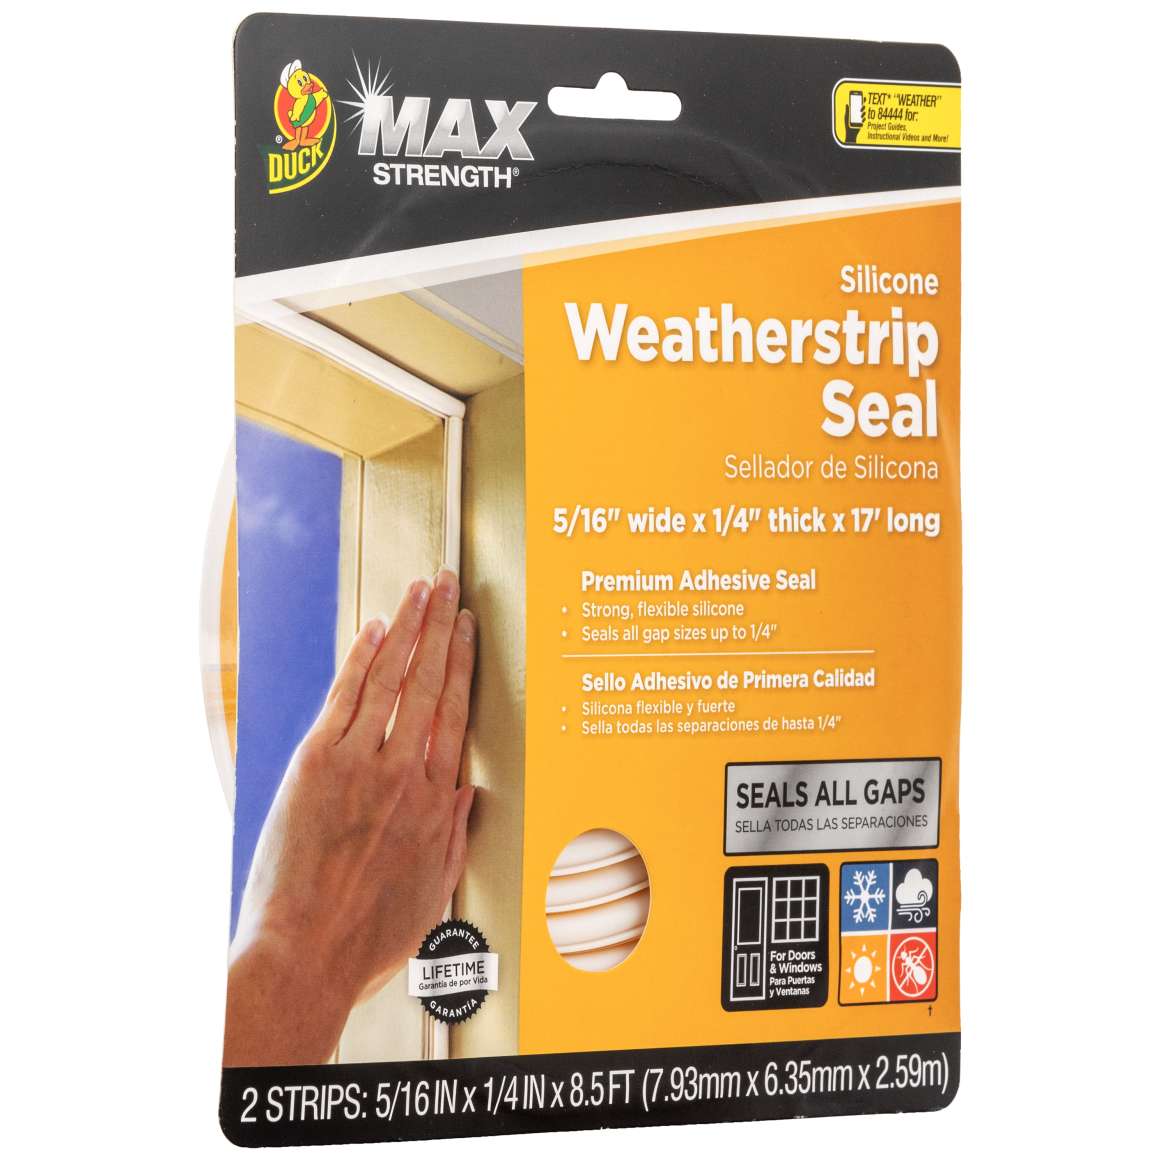 Max Strength Silicone Weatherstrip Seal Image